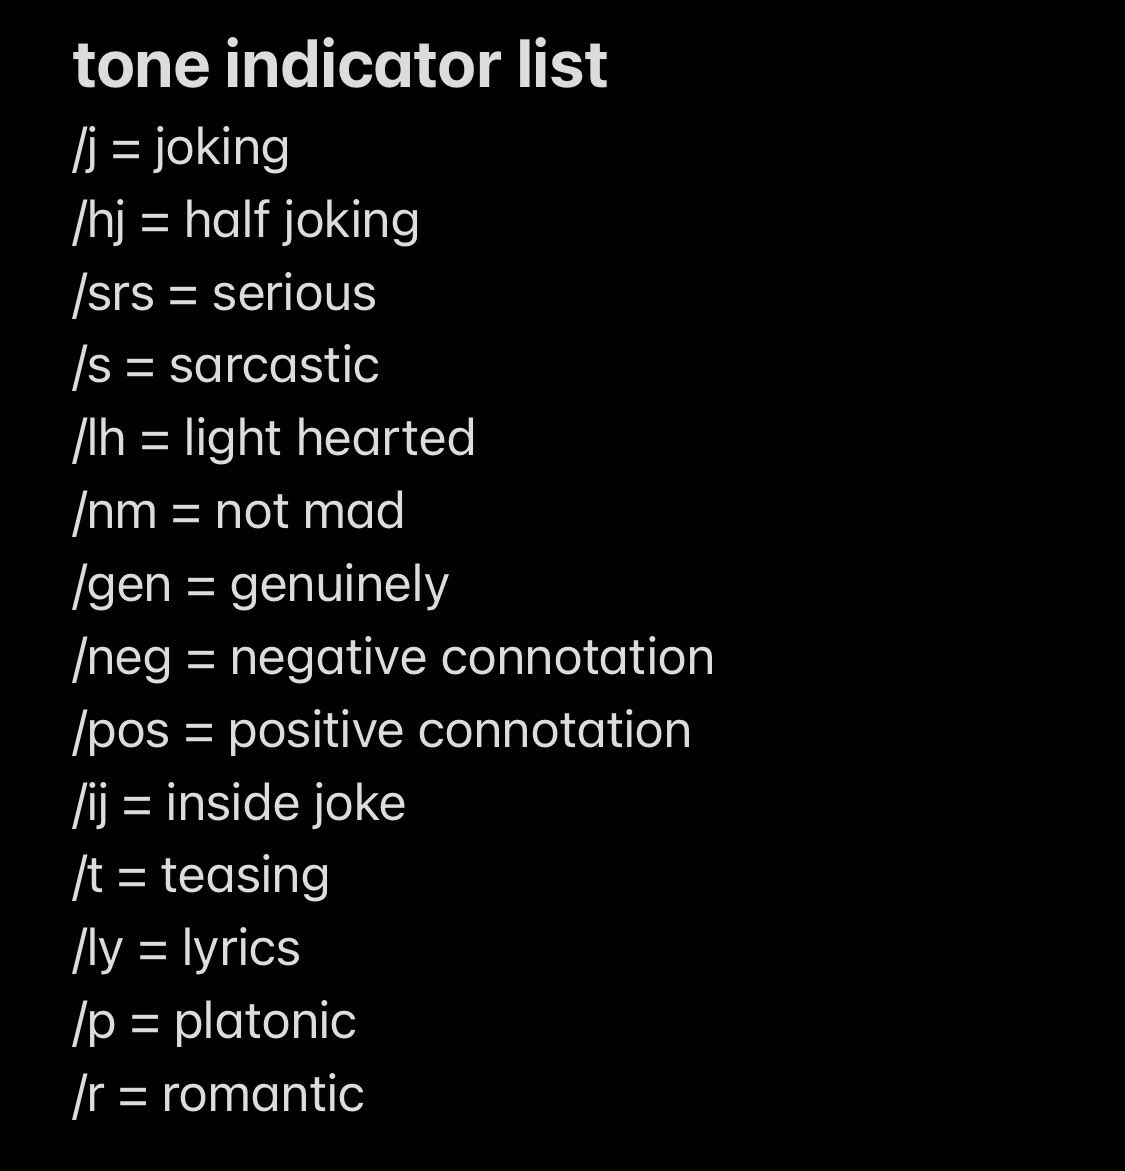 Philza Updates 💚🎗 on Twitter: "Hey guys! just a friendly reminder to tag your tweets that jokingly hating sbi with tone indicators! it may be hard for some people who missed